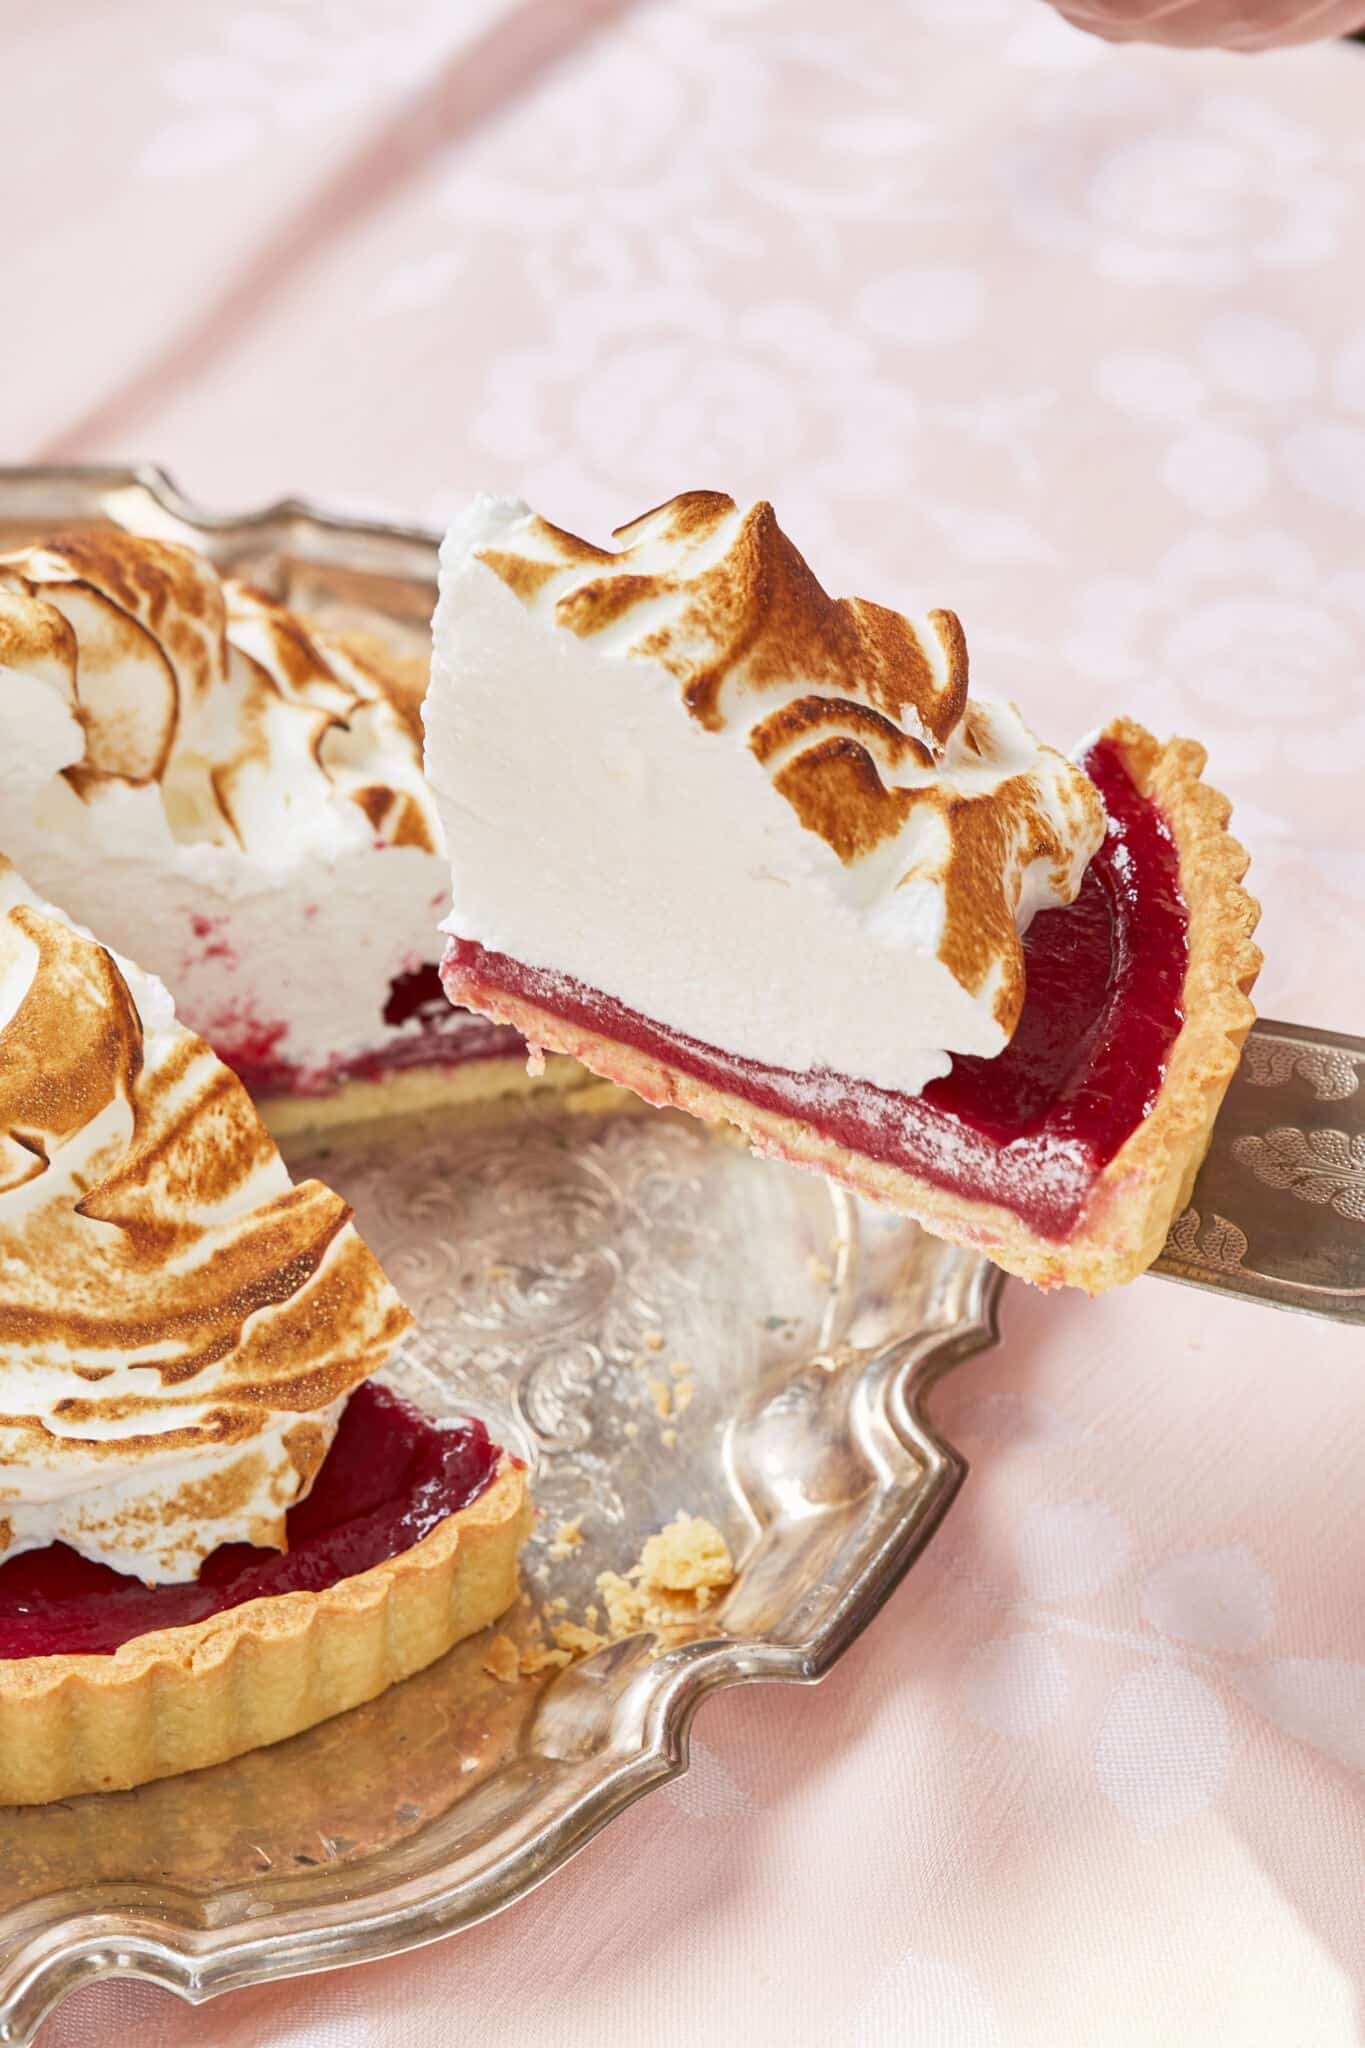 A slice of Mile-High Raspberry Meringue Pie is cut and being lifted from the silver serving plate. The side of the slice shows its flaky crust, creamy tangy sweet raspberry curd filling and silky meringue toasted on top. 